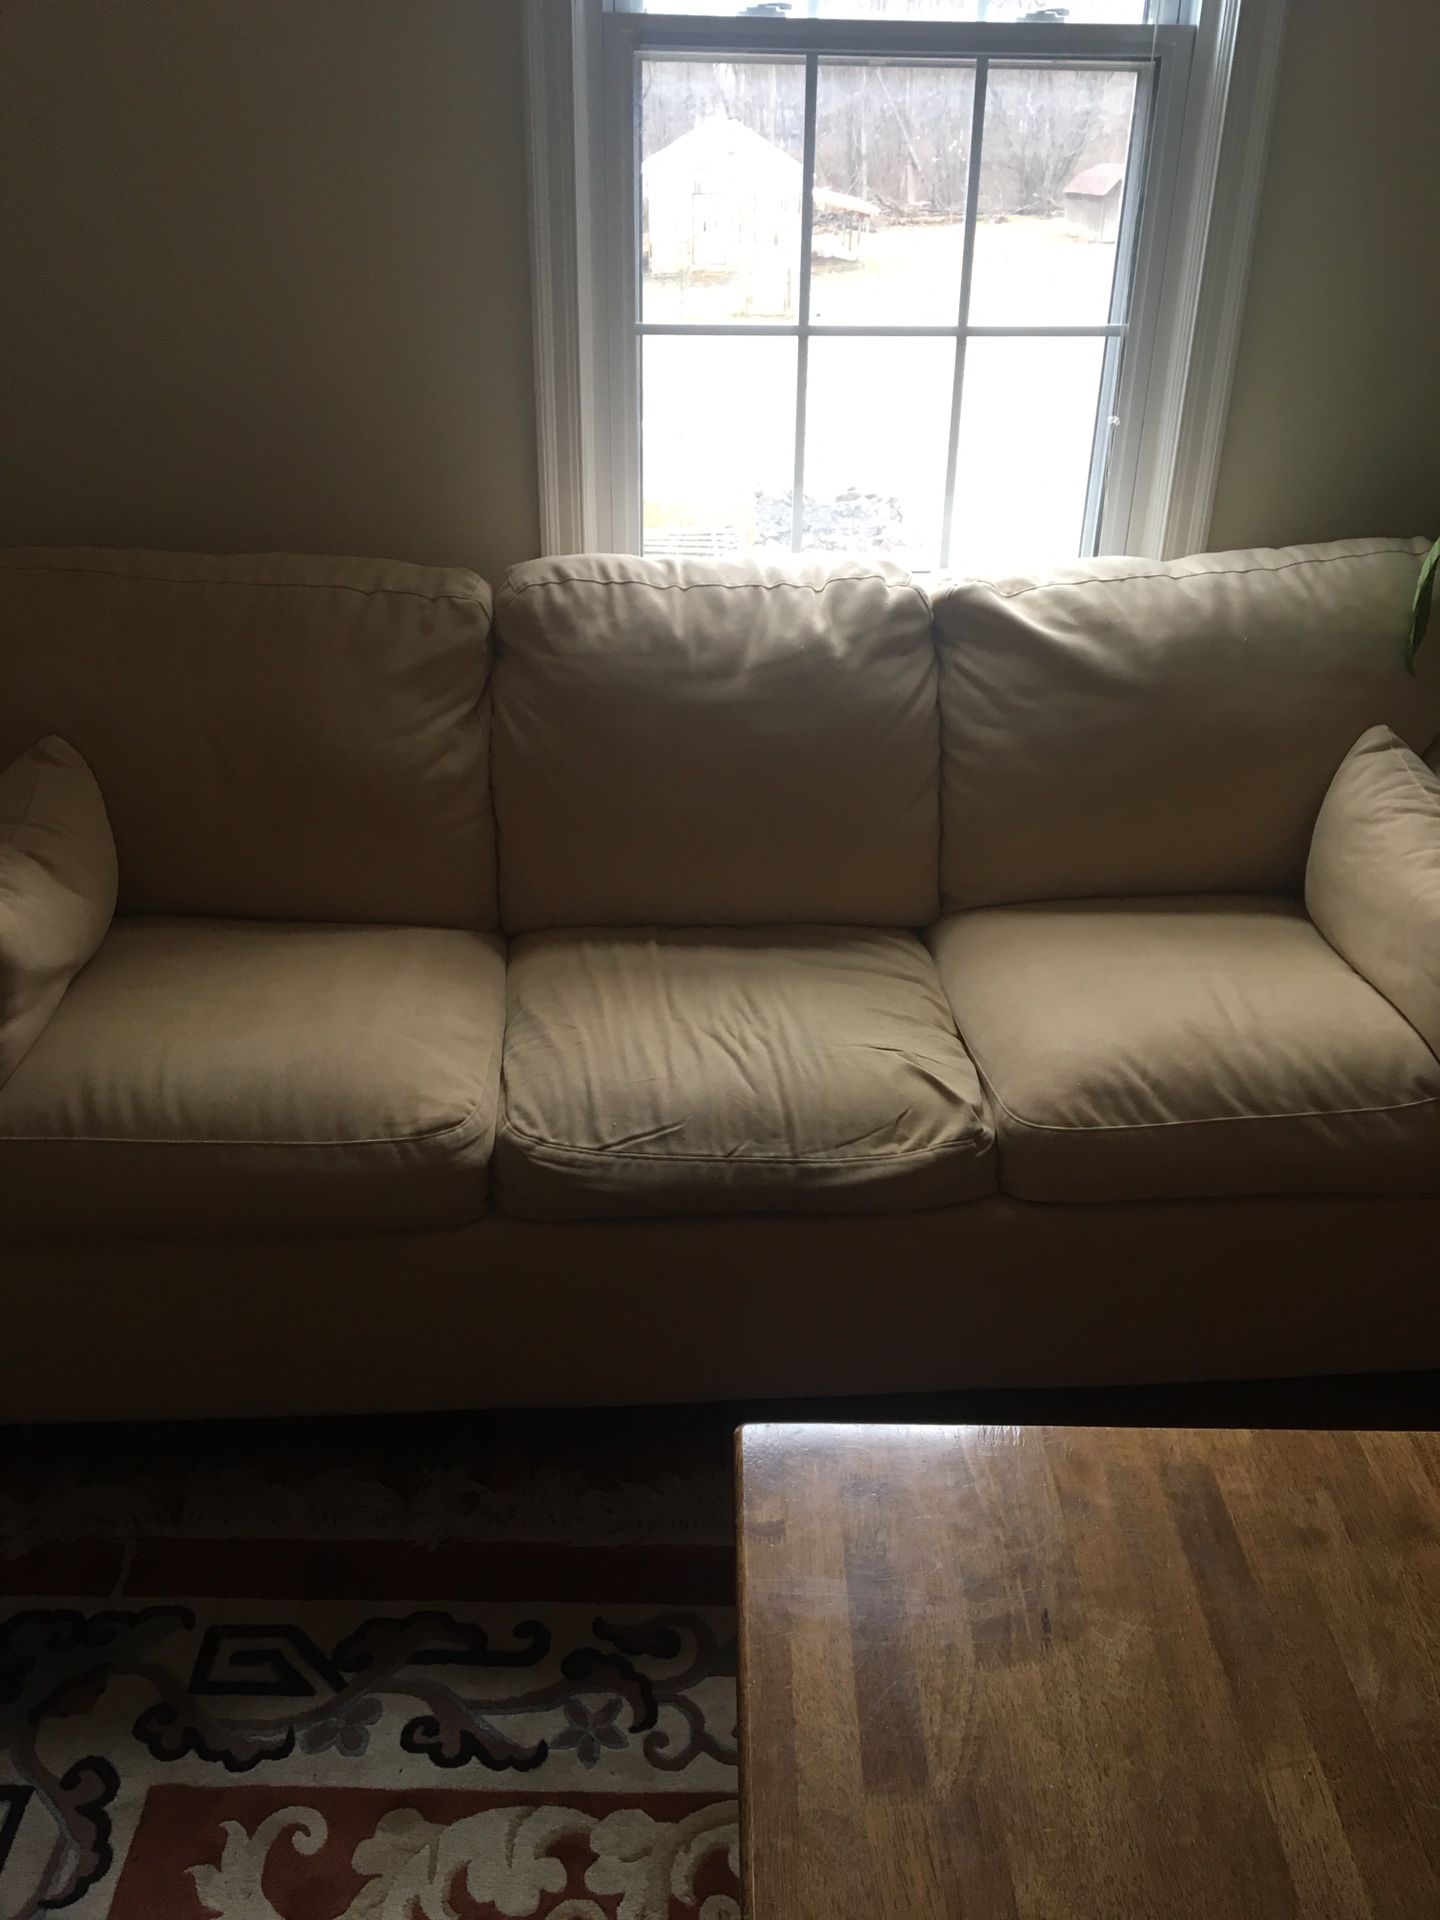 Soft yellow sleeper couch